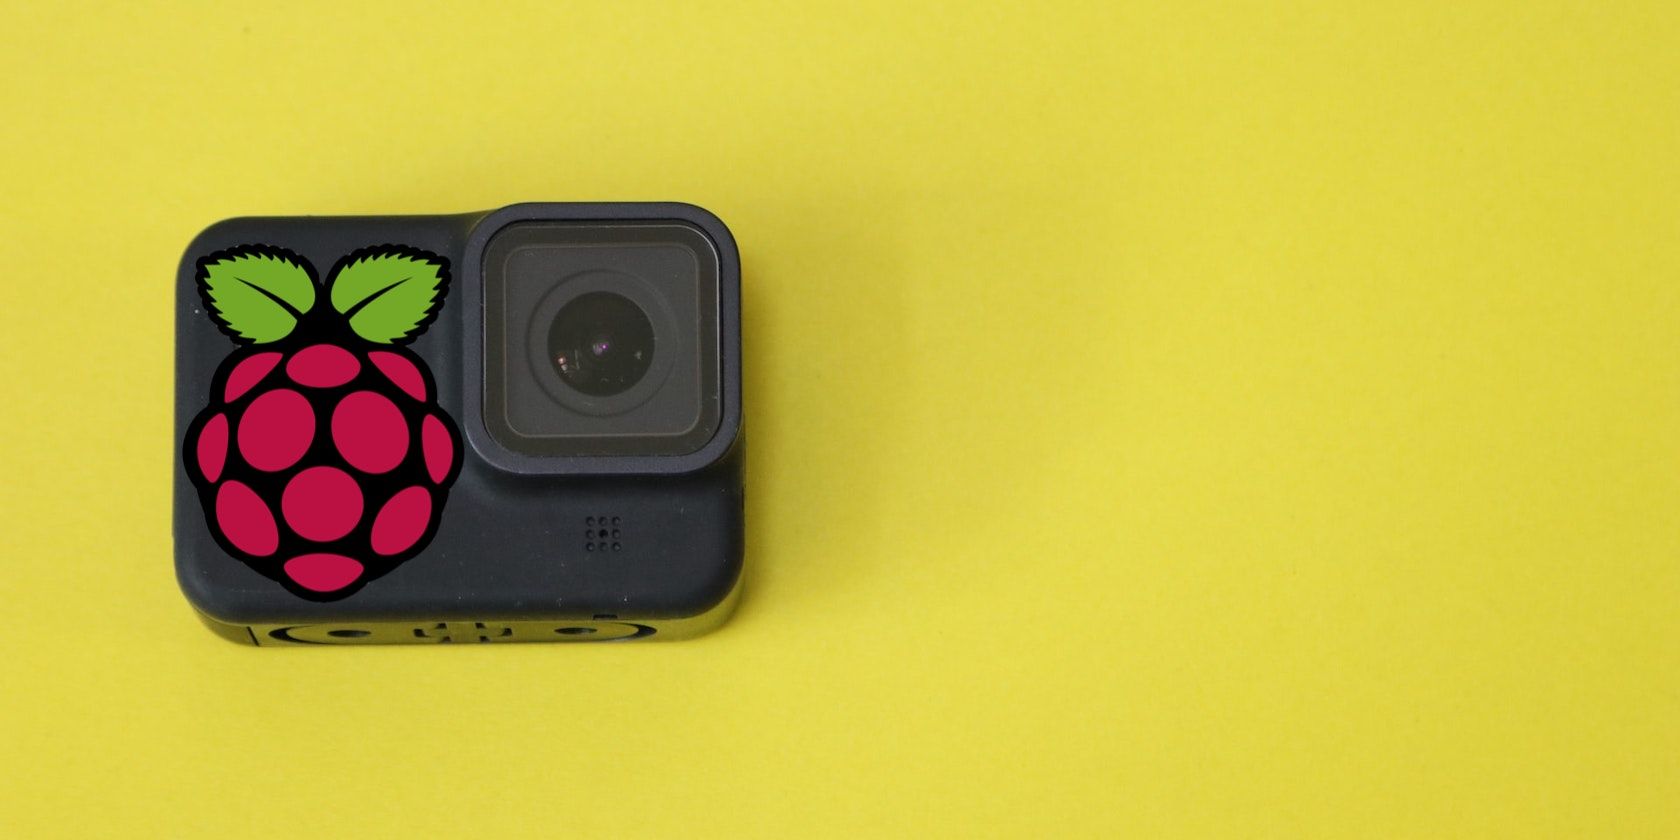 5 Brilliant Projects Using a Raspberry Pi and Camera